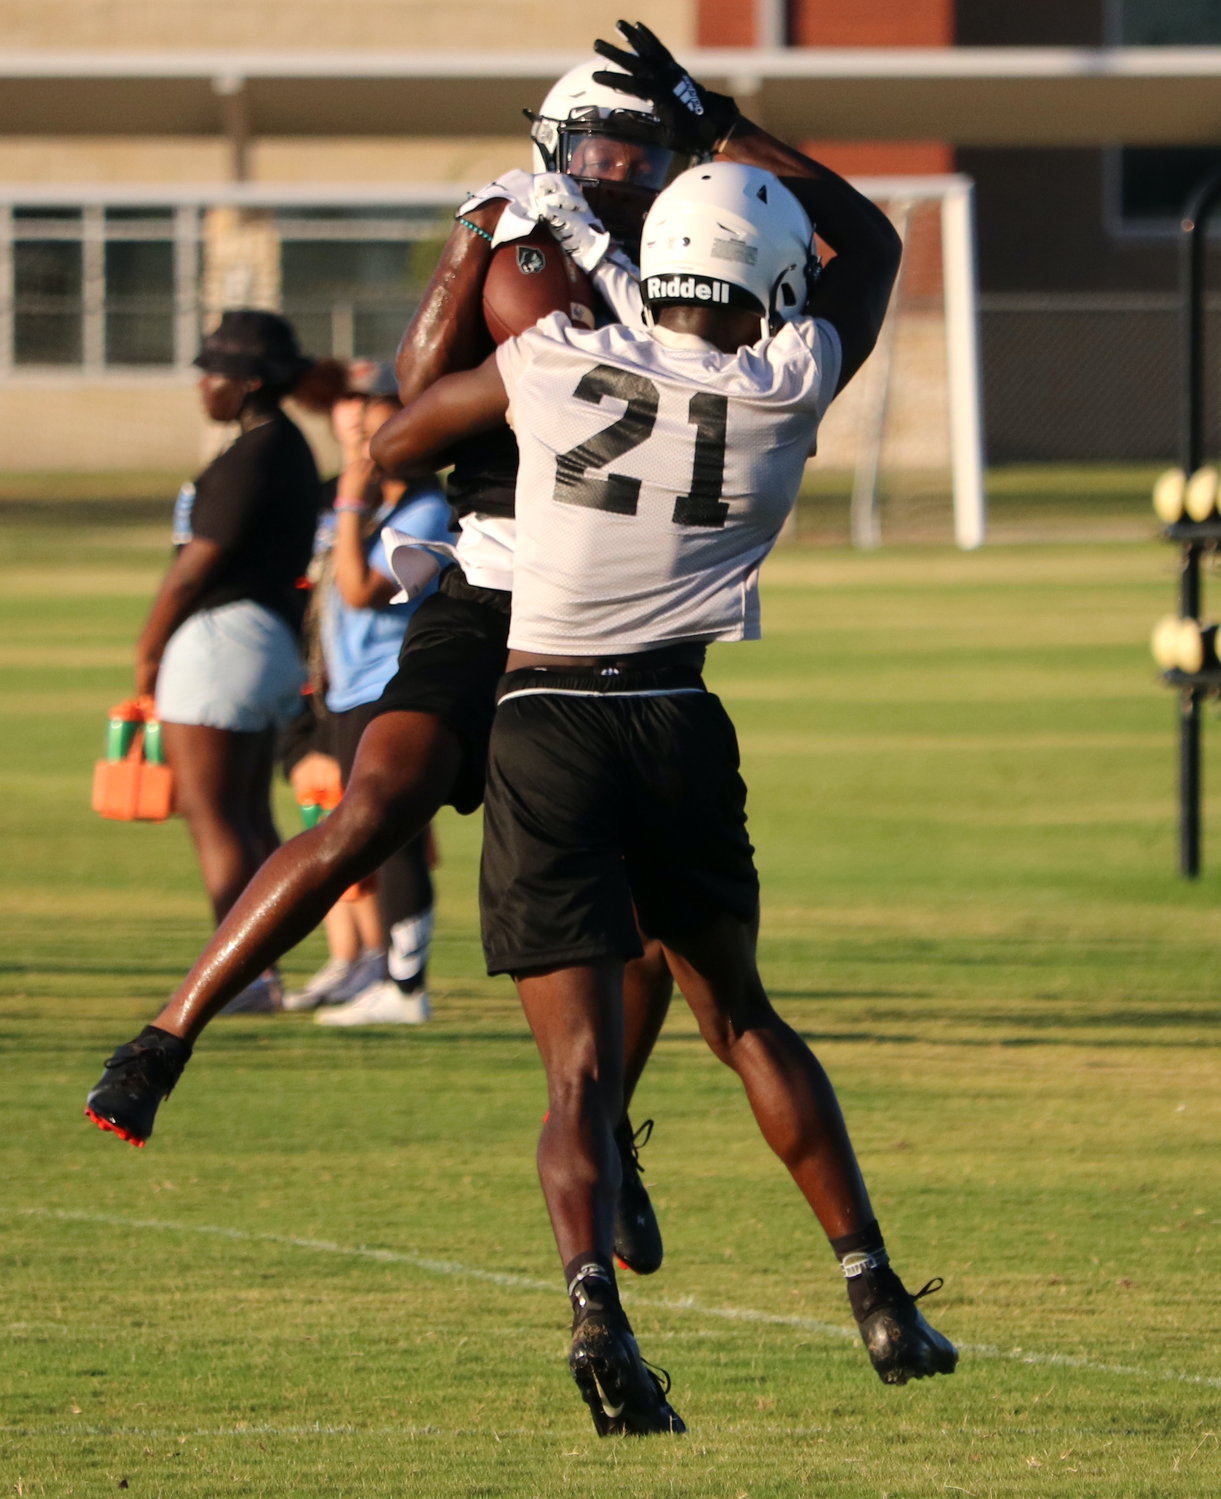 Jason Blue makes a jumping catch over a defensive back during Paetow’s practice on Monday morning.